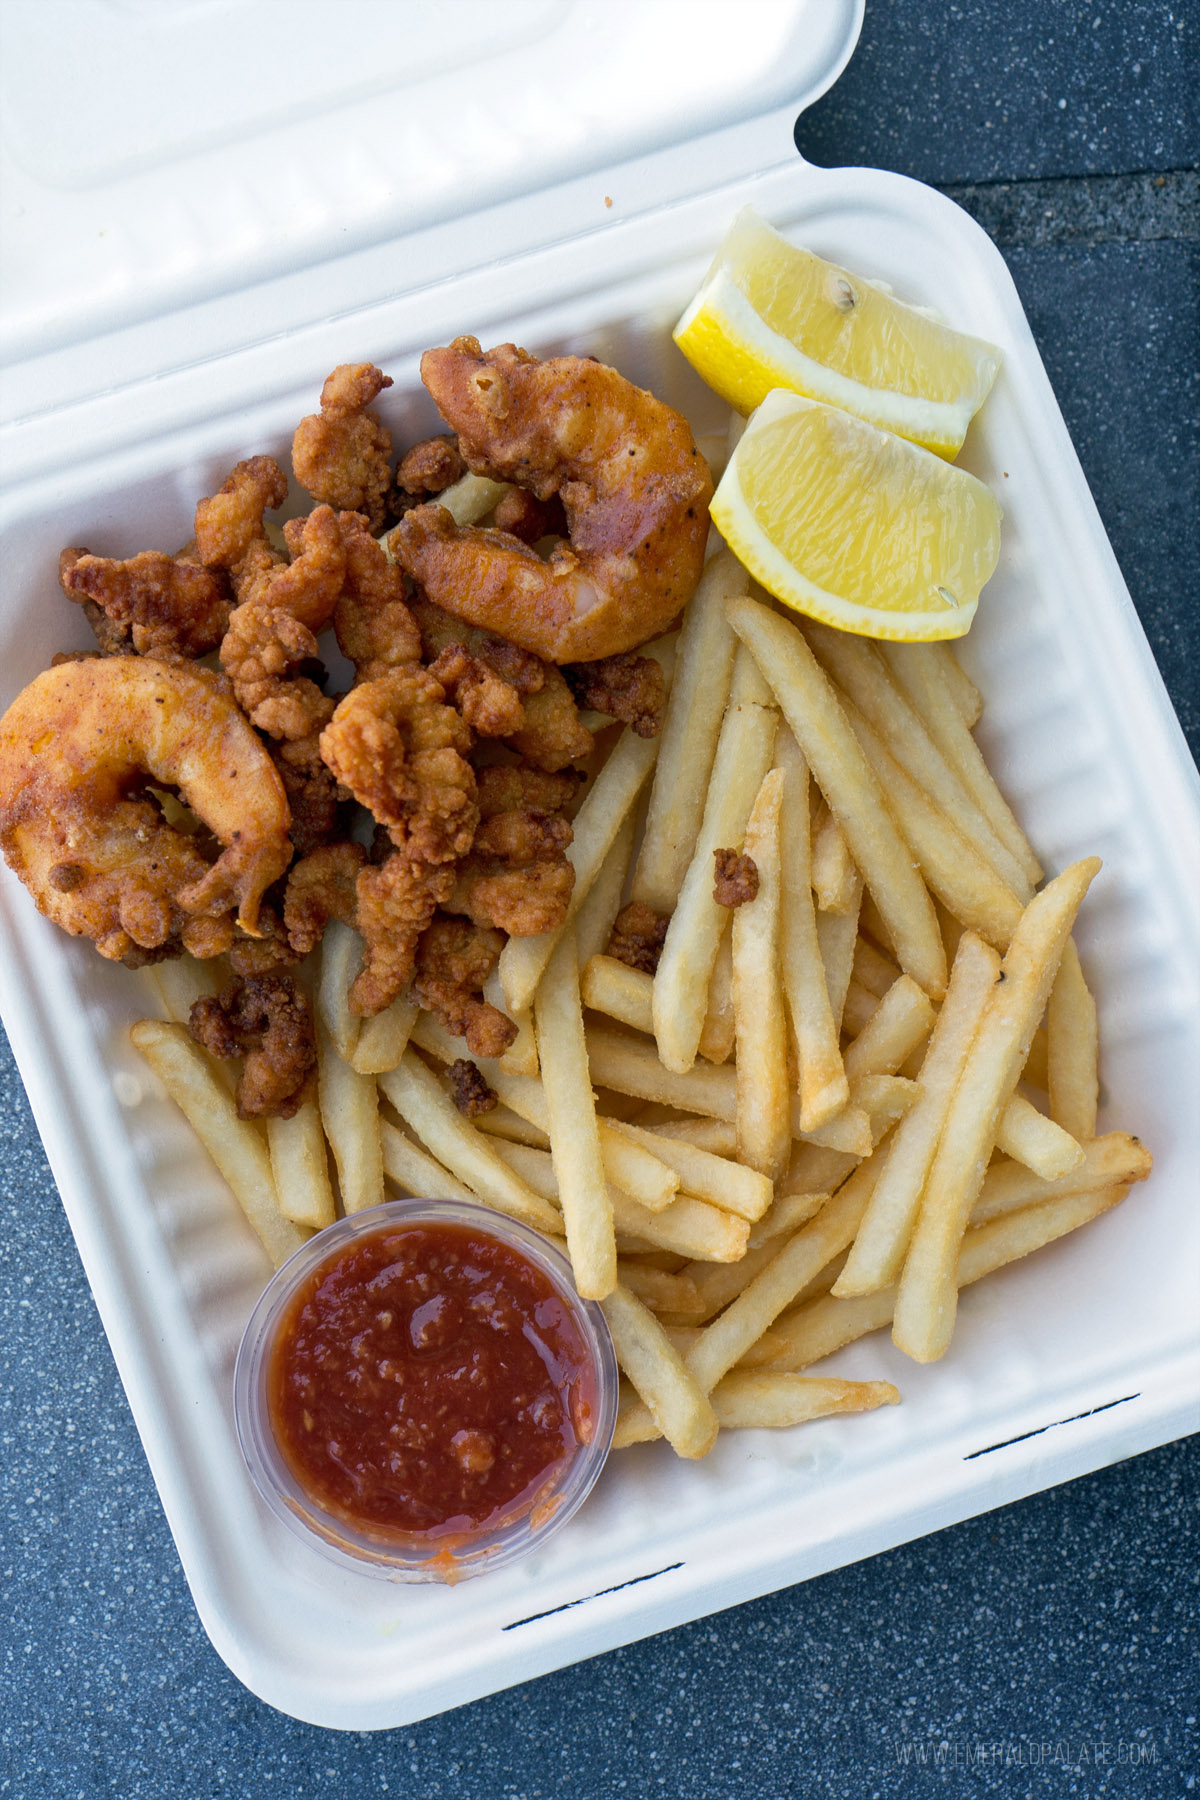 Fried shrimp, clam strips, and fries in a takeout container